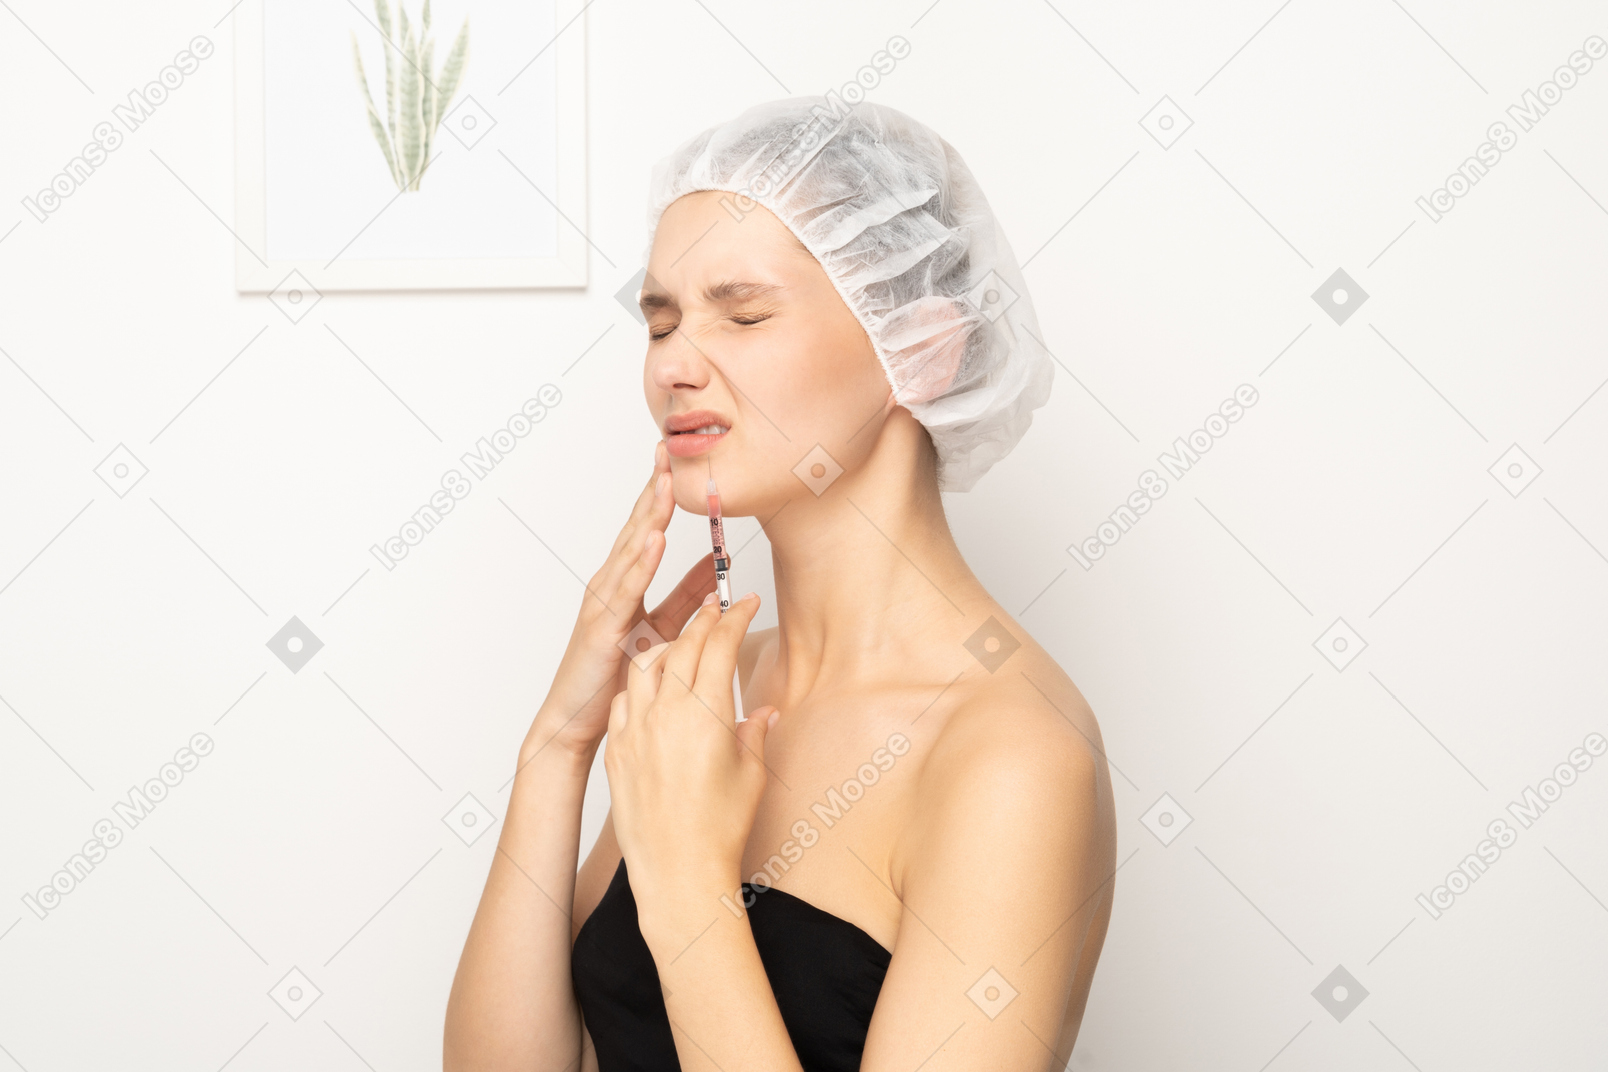 Woman in pain holding syringe